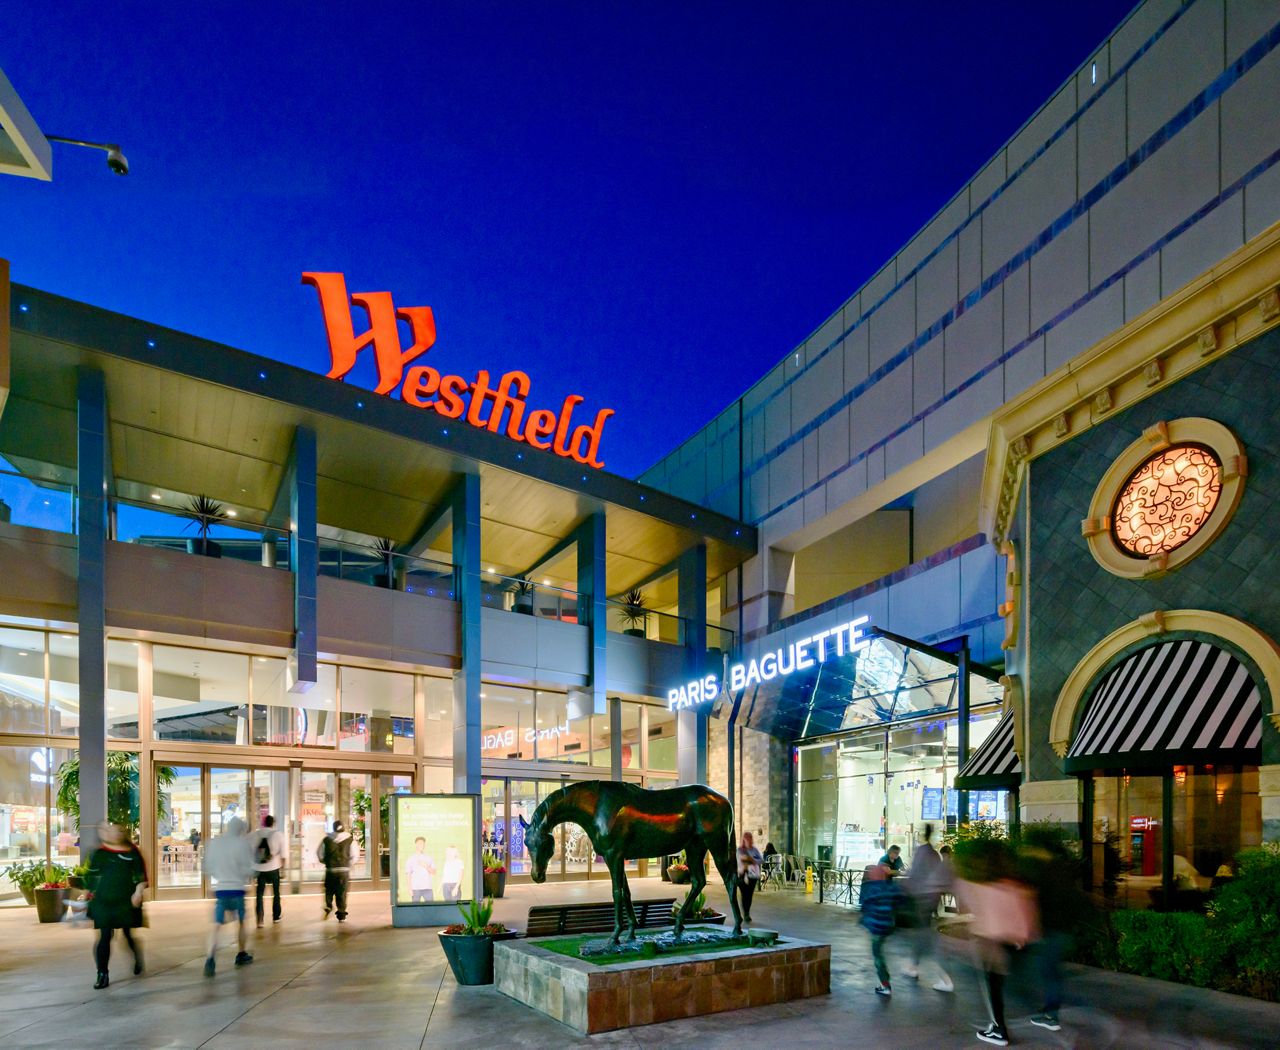 Westfield owner to sell all U.S. malls. What will happen in San